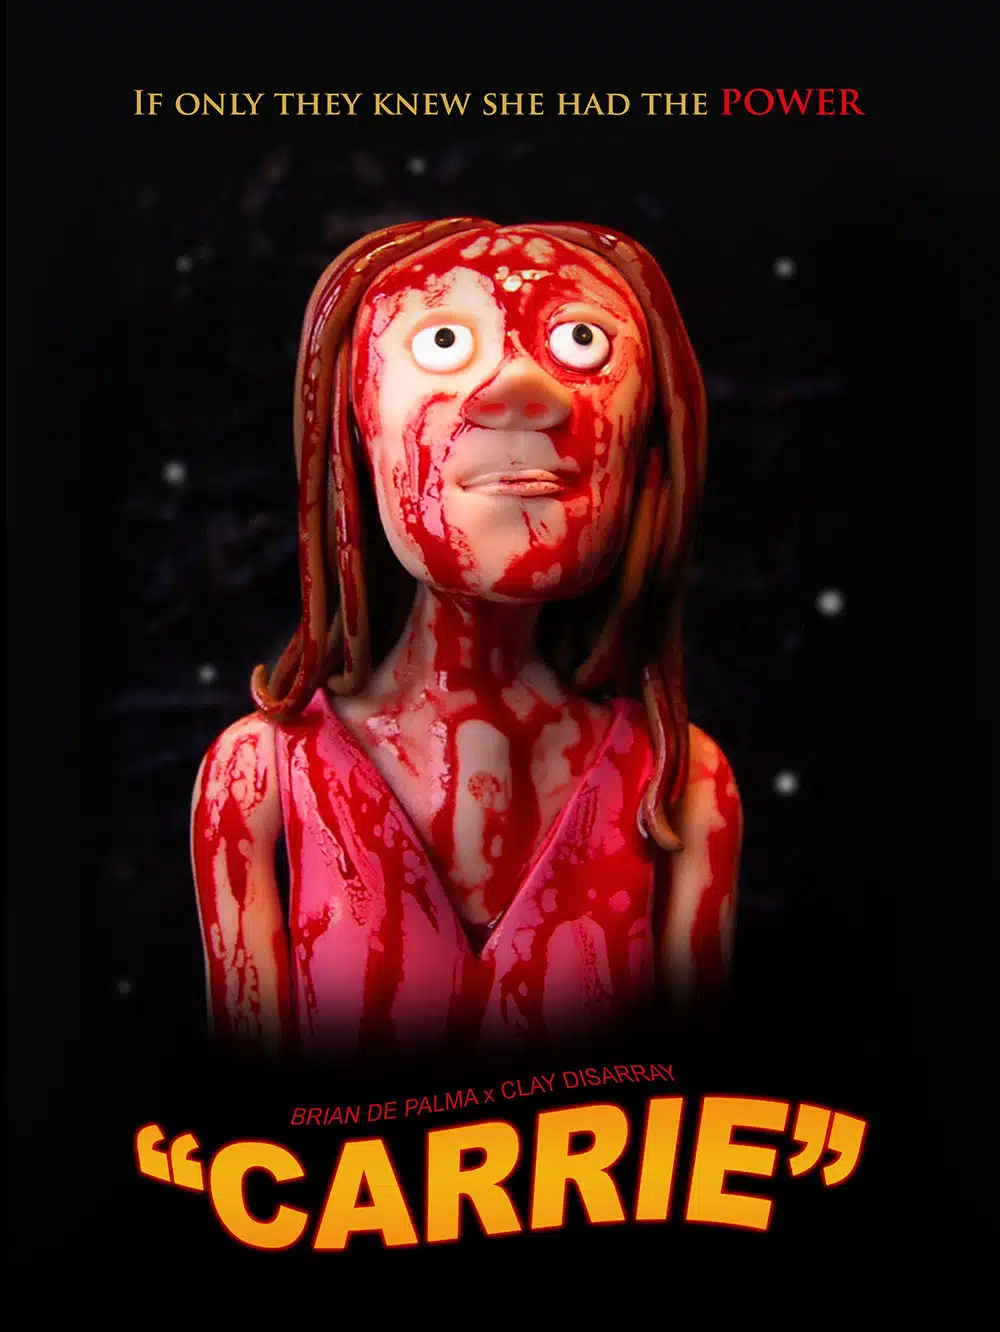 Lizzie Campbell is a clay disarray posters carrie